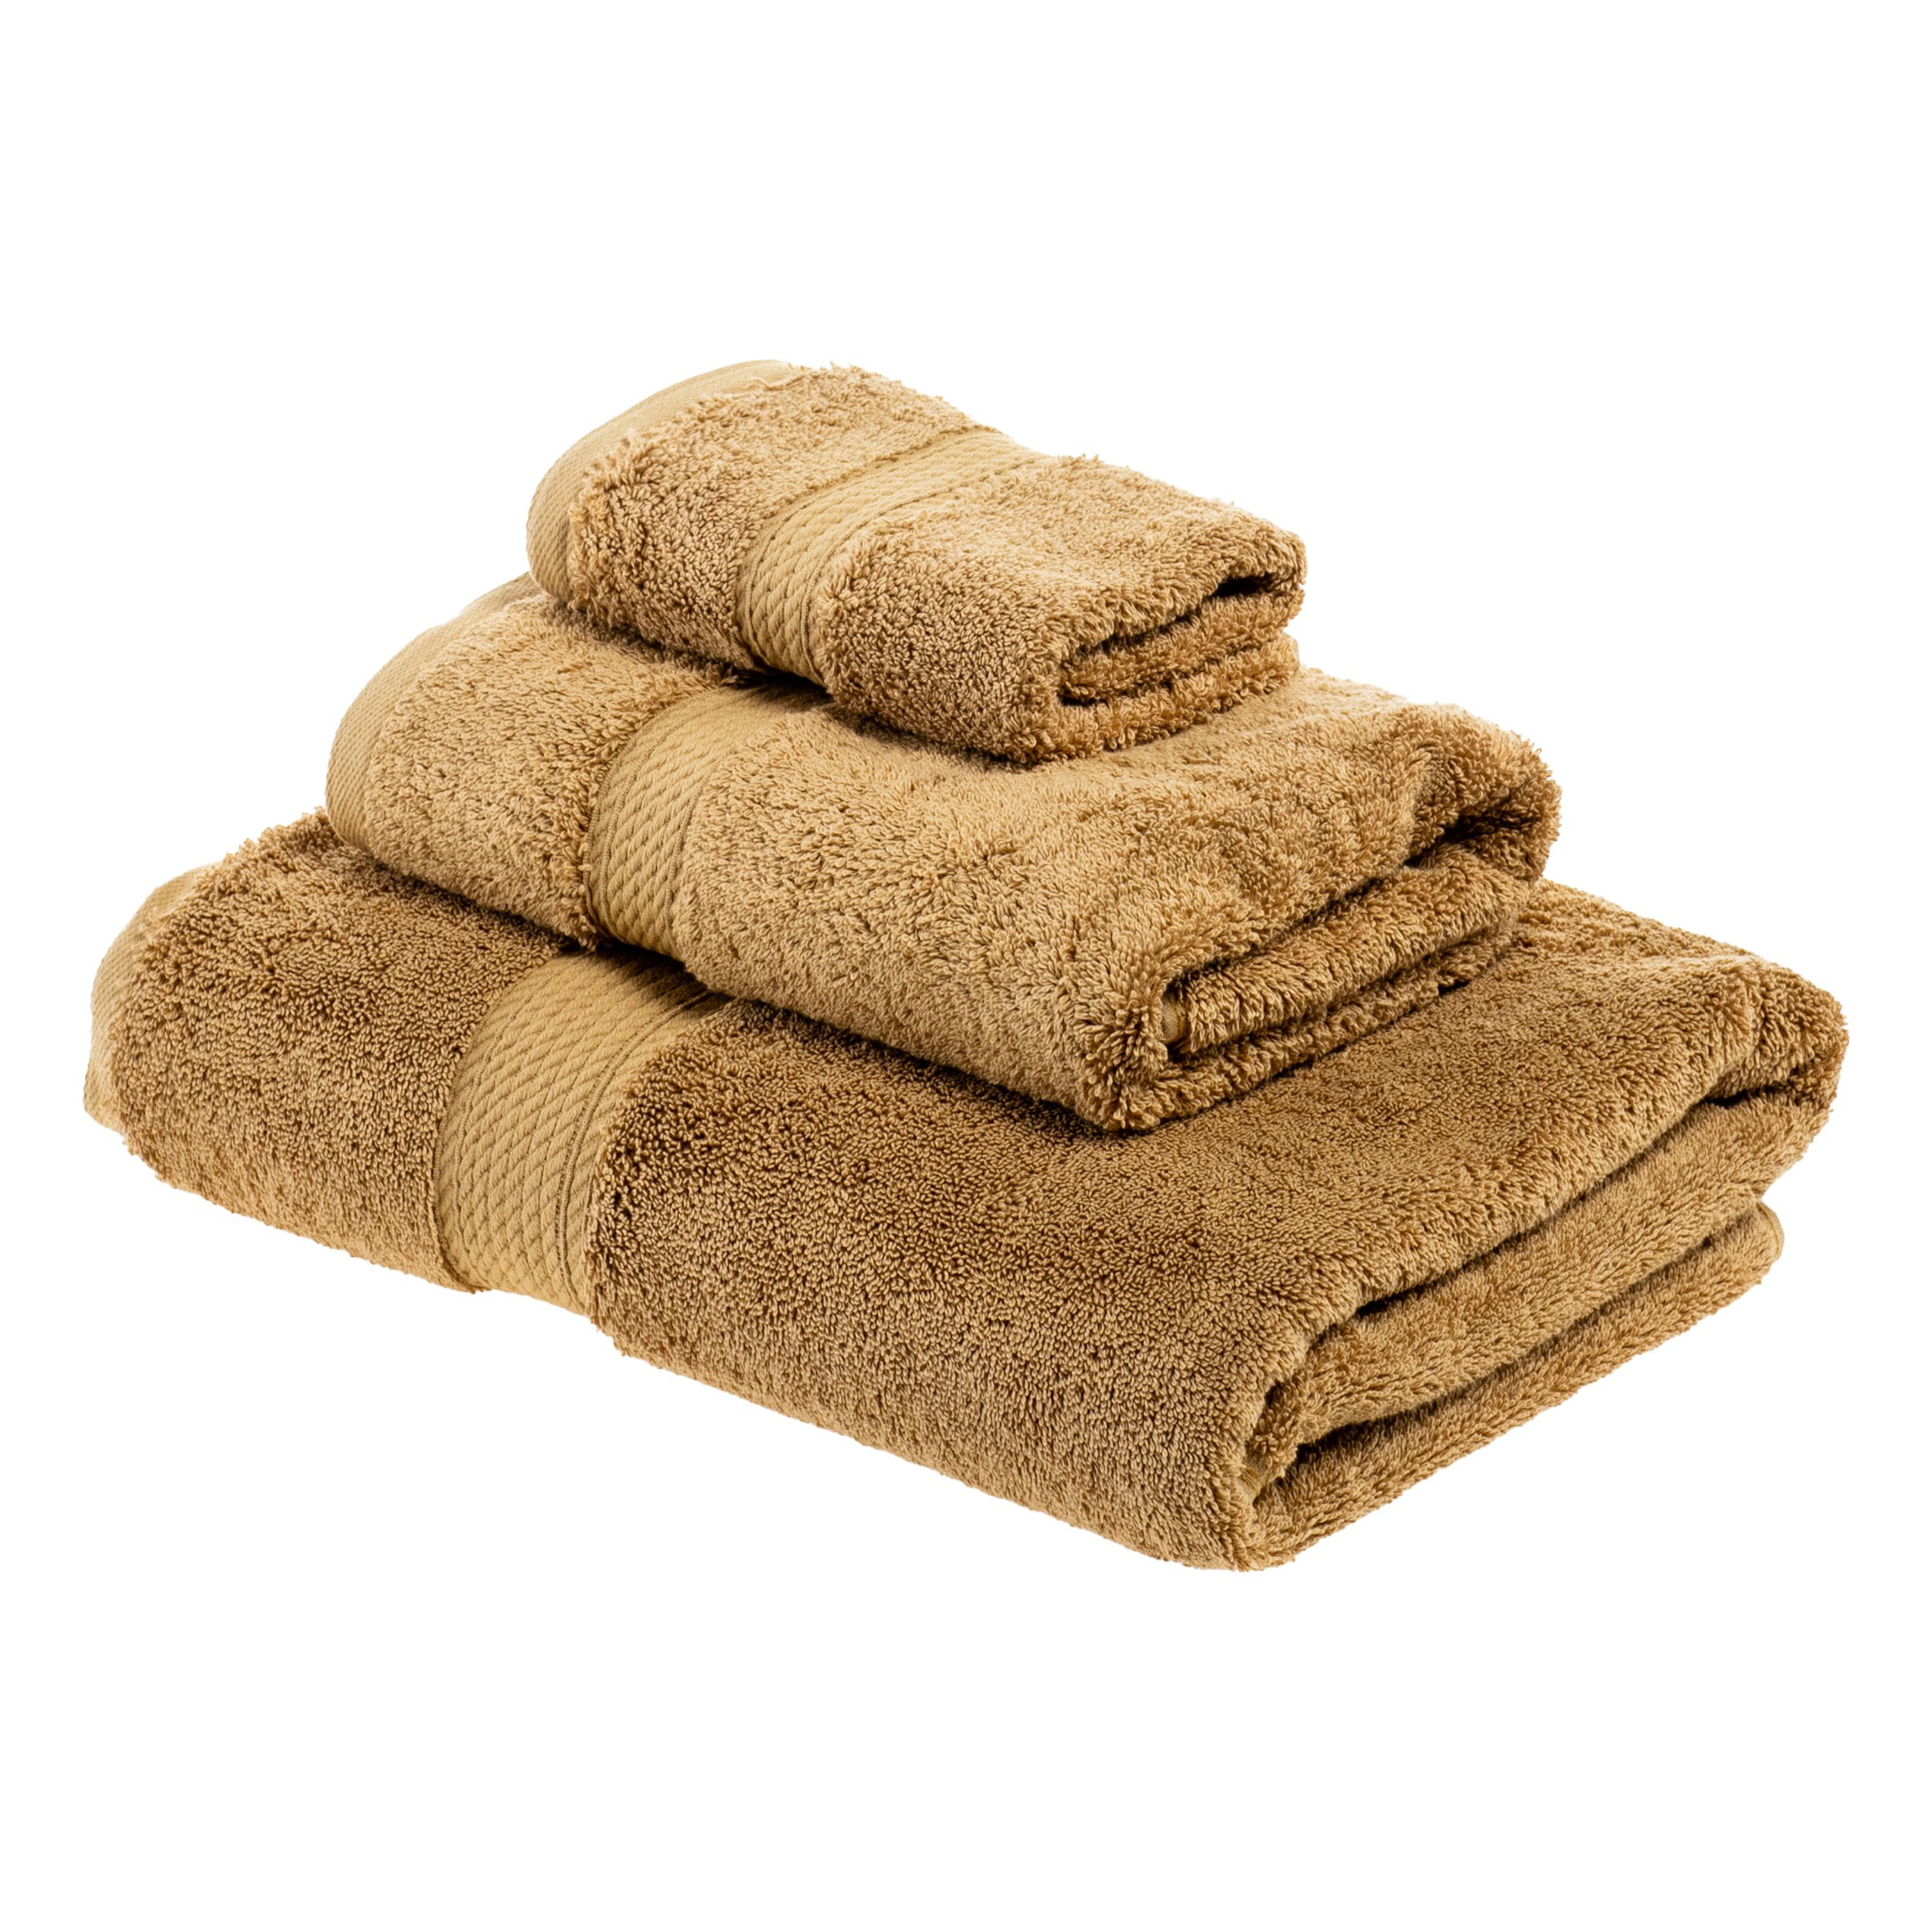 900 GSM Egyptian Cotton Towel Set Of 8, Plush & Absorbent Face, Hand & Bath  Towels - LoftyStyles